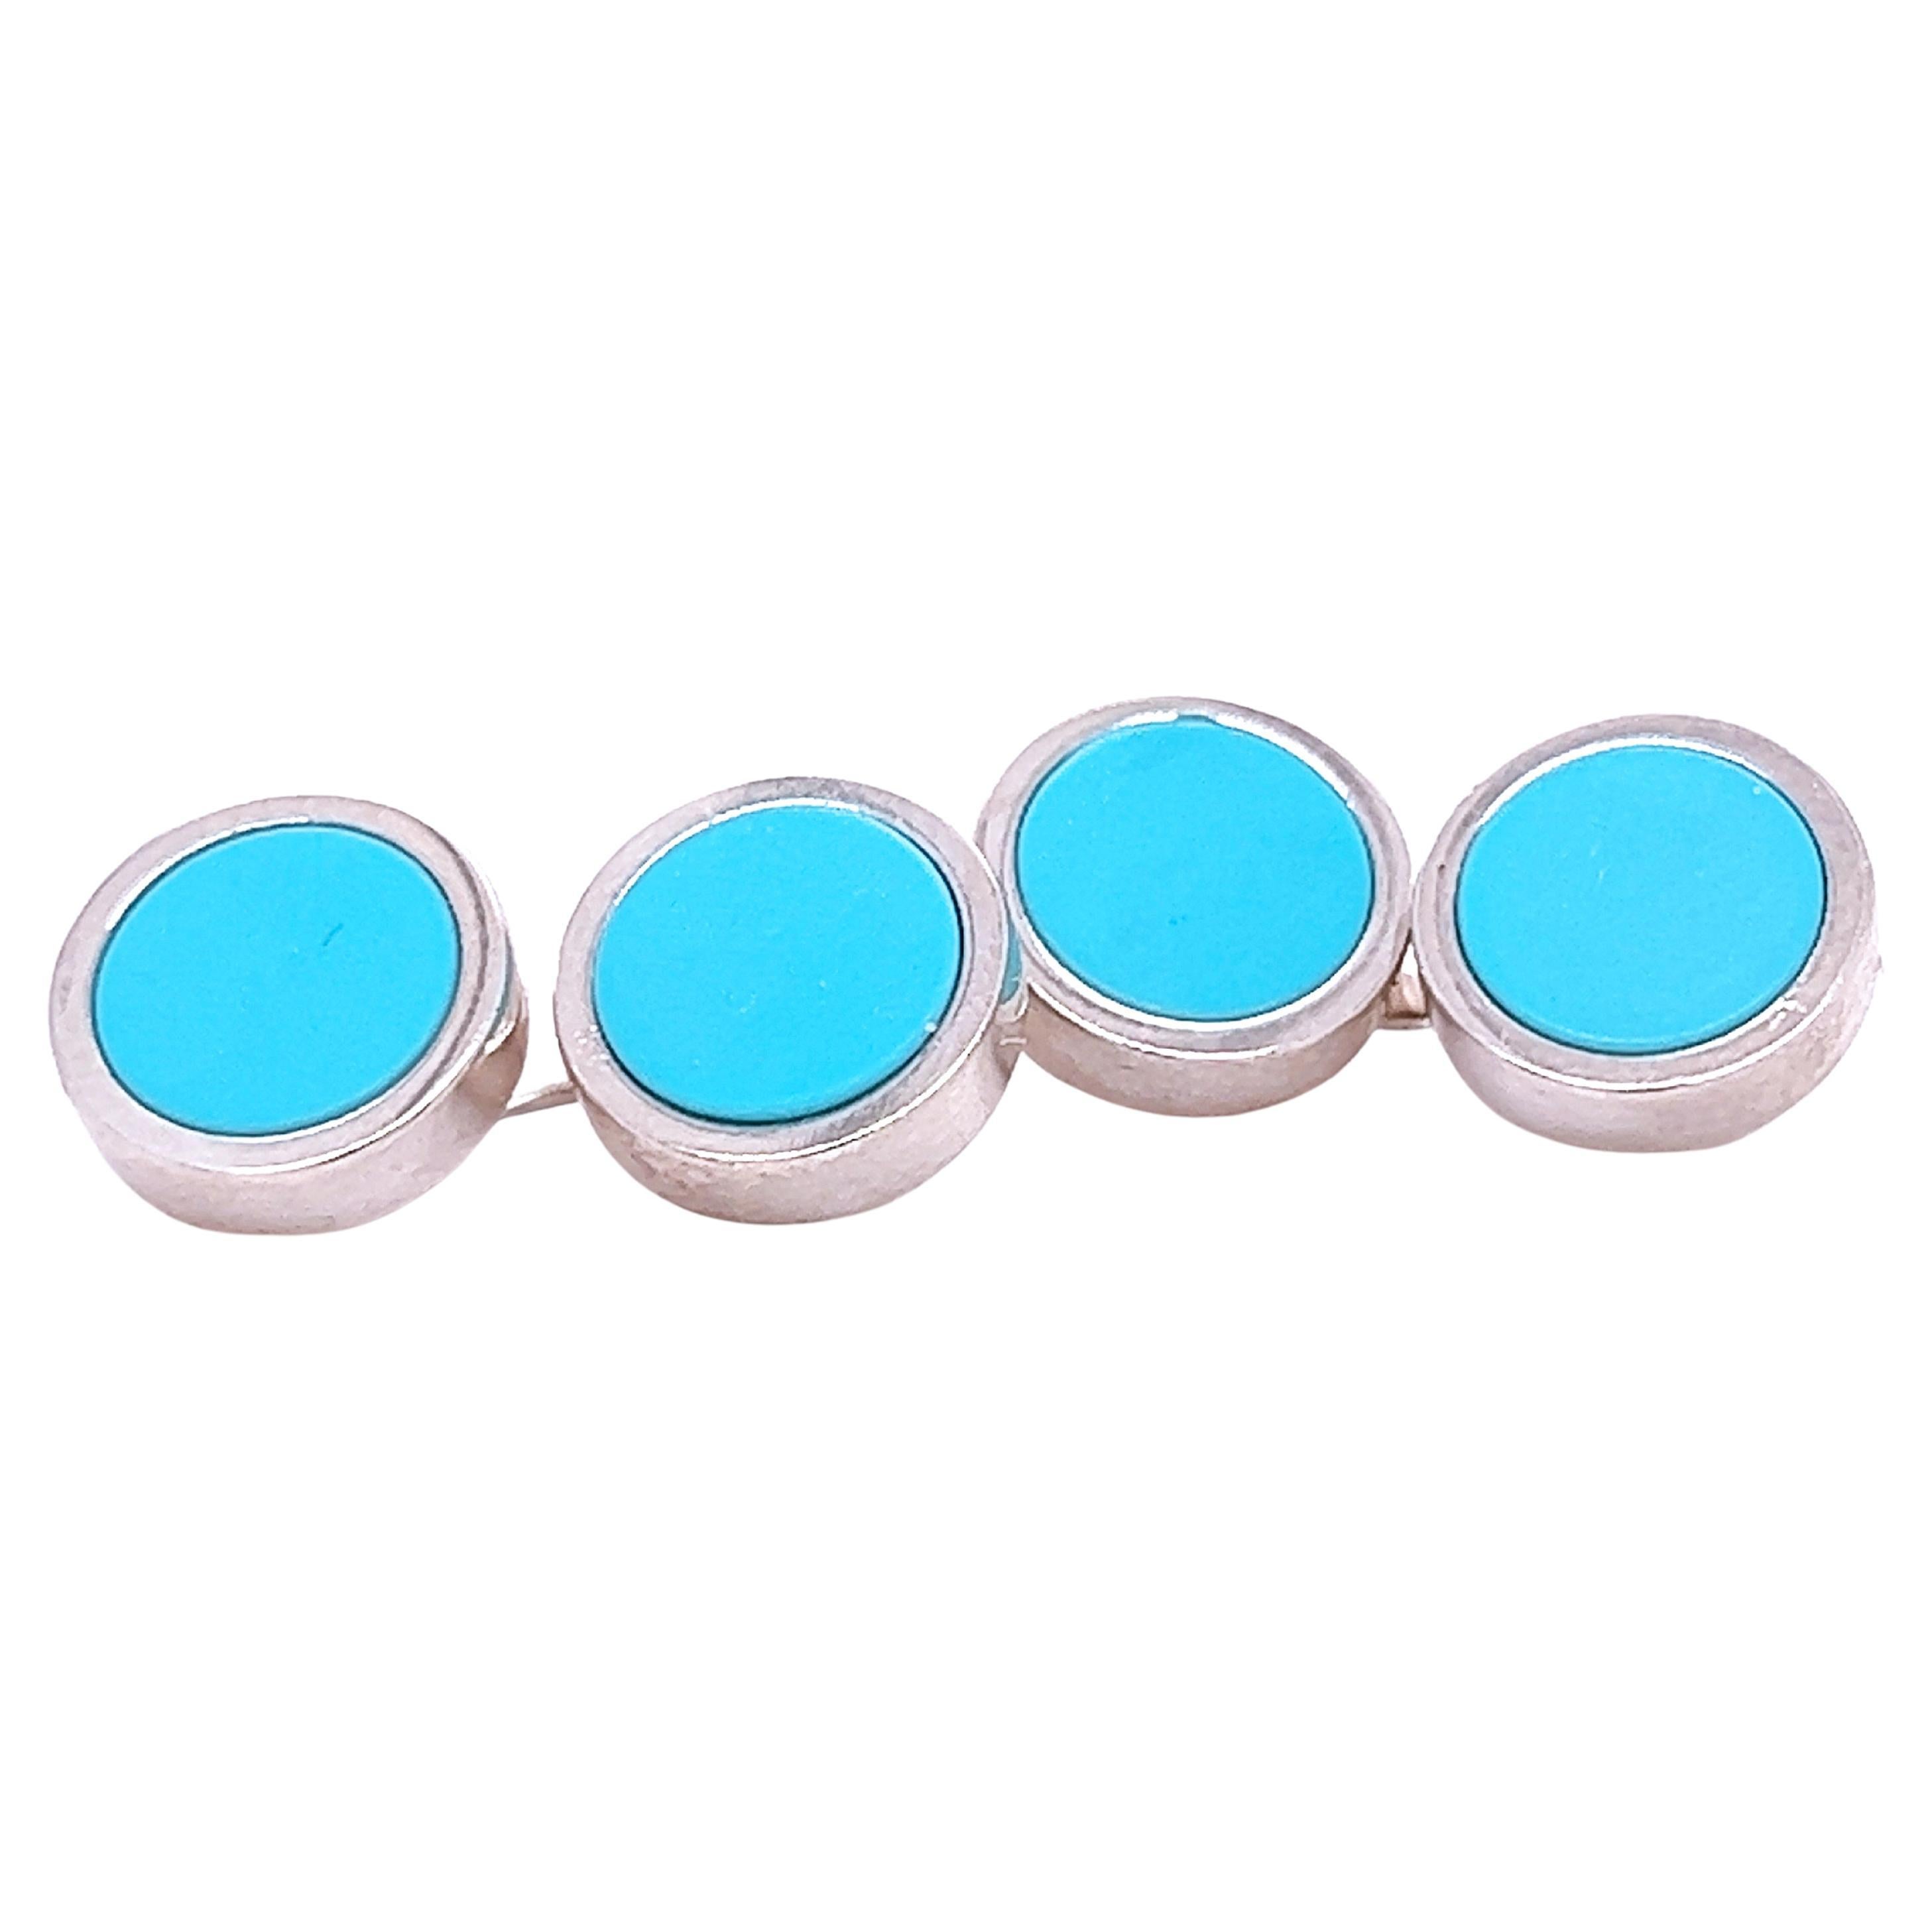 Berca Natural Turquoise Disk Round Shaped Sterling Silver Cufflinks